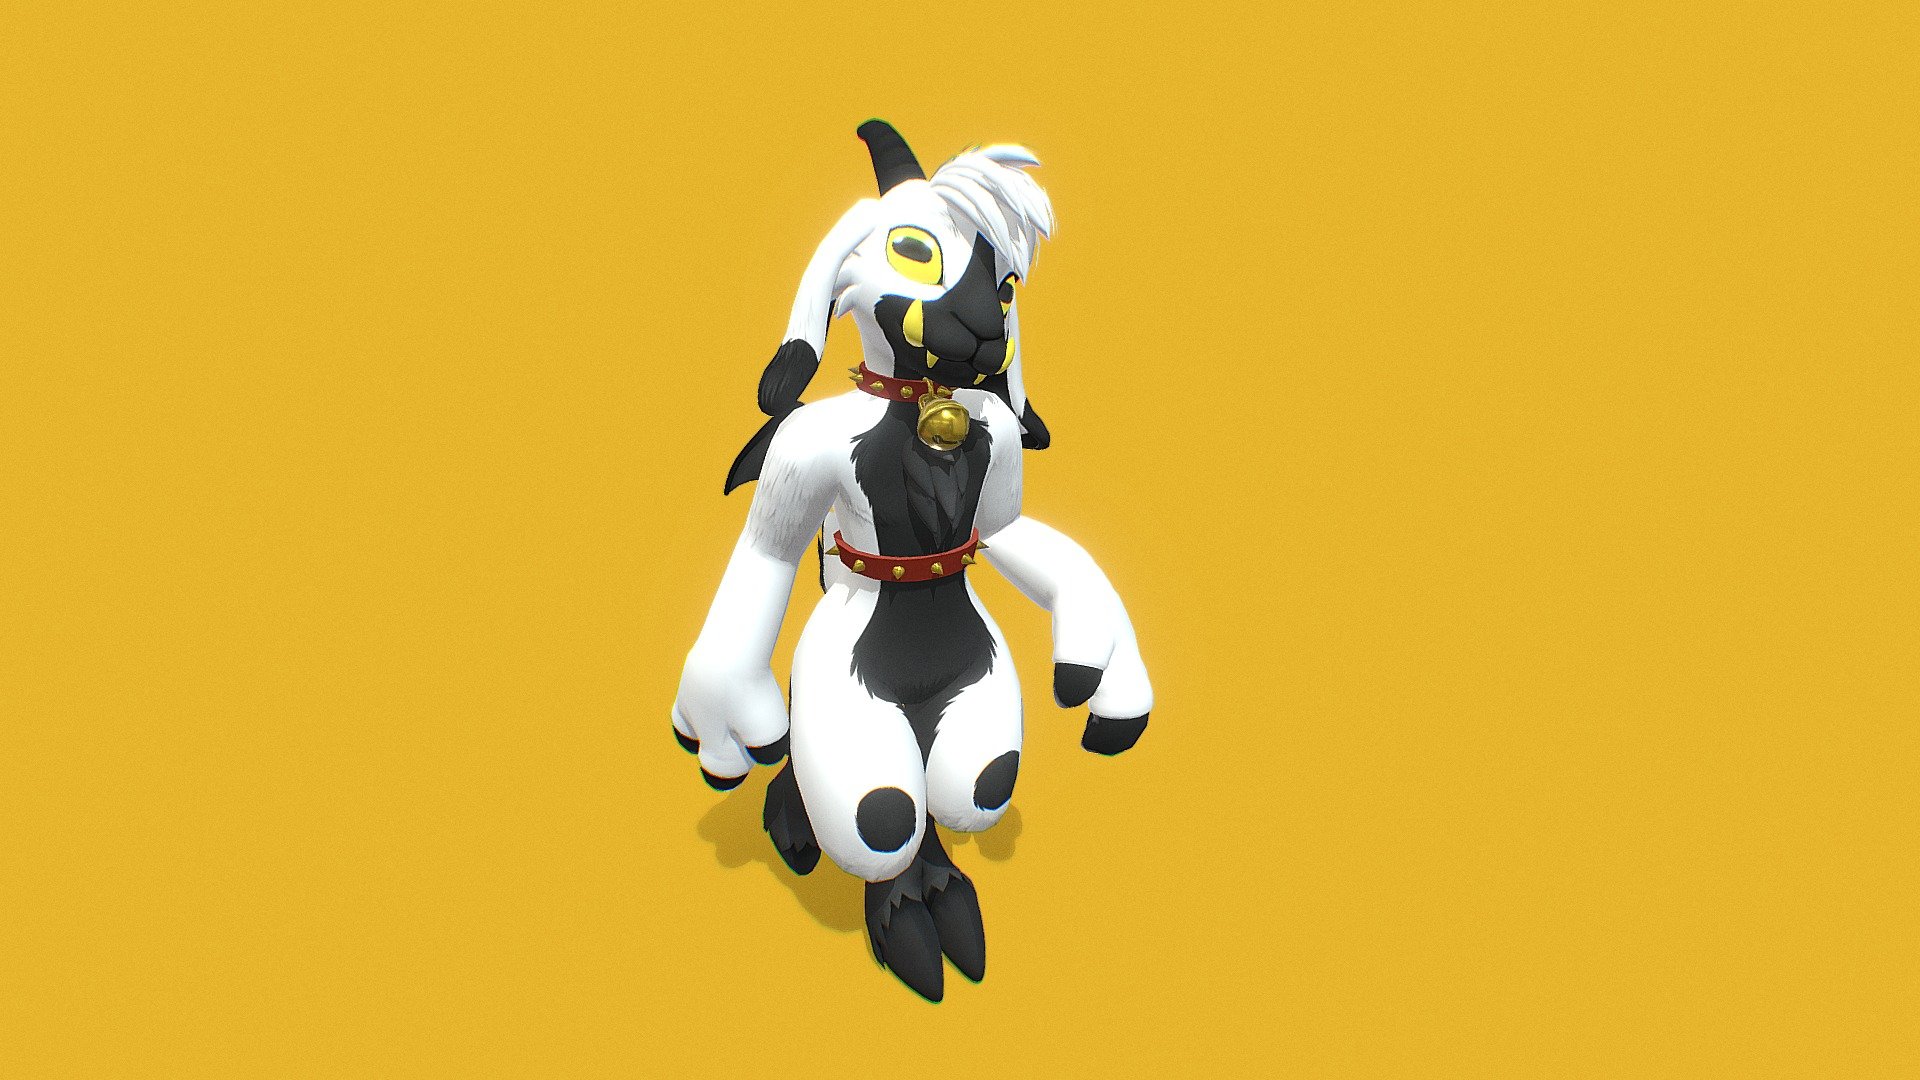 Pooka, the goat/puca !

Made to be used in VRChat, features emotes, an outfit, a harness, wing that flap and tuck, a different hairstyle and more~

This was made as a custom commission and is not downloadable publicly. Thank you!! - Pooka VRChat Avatar - 3D model by Meelo 3d model